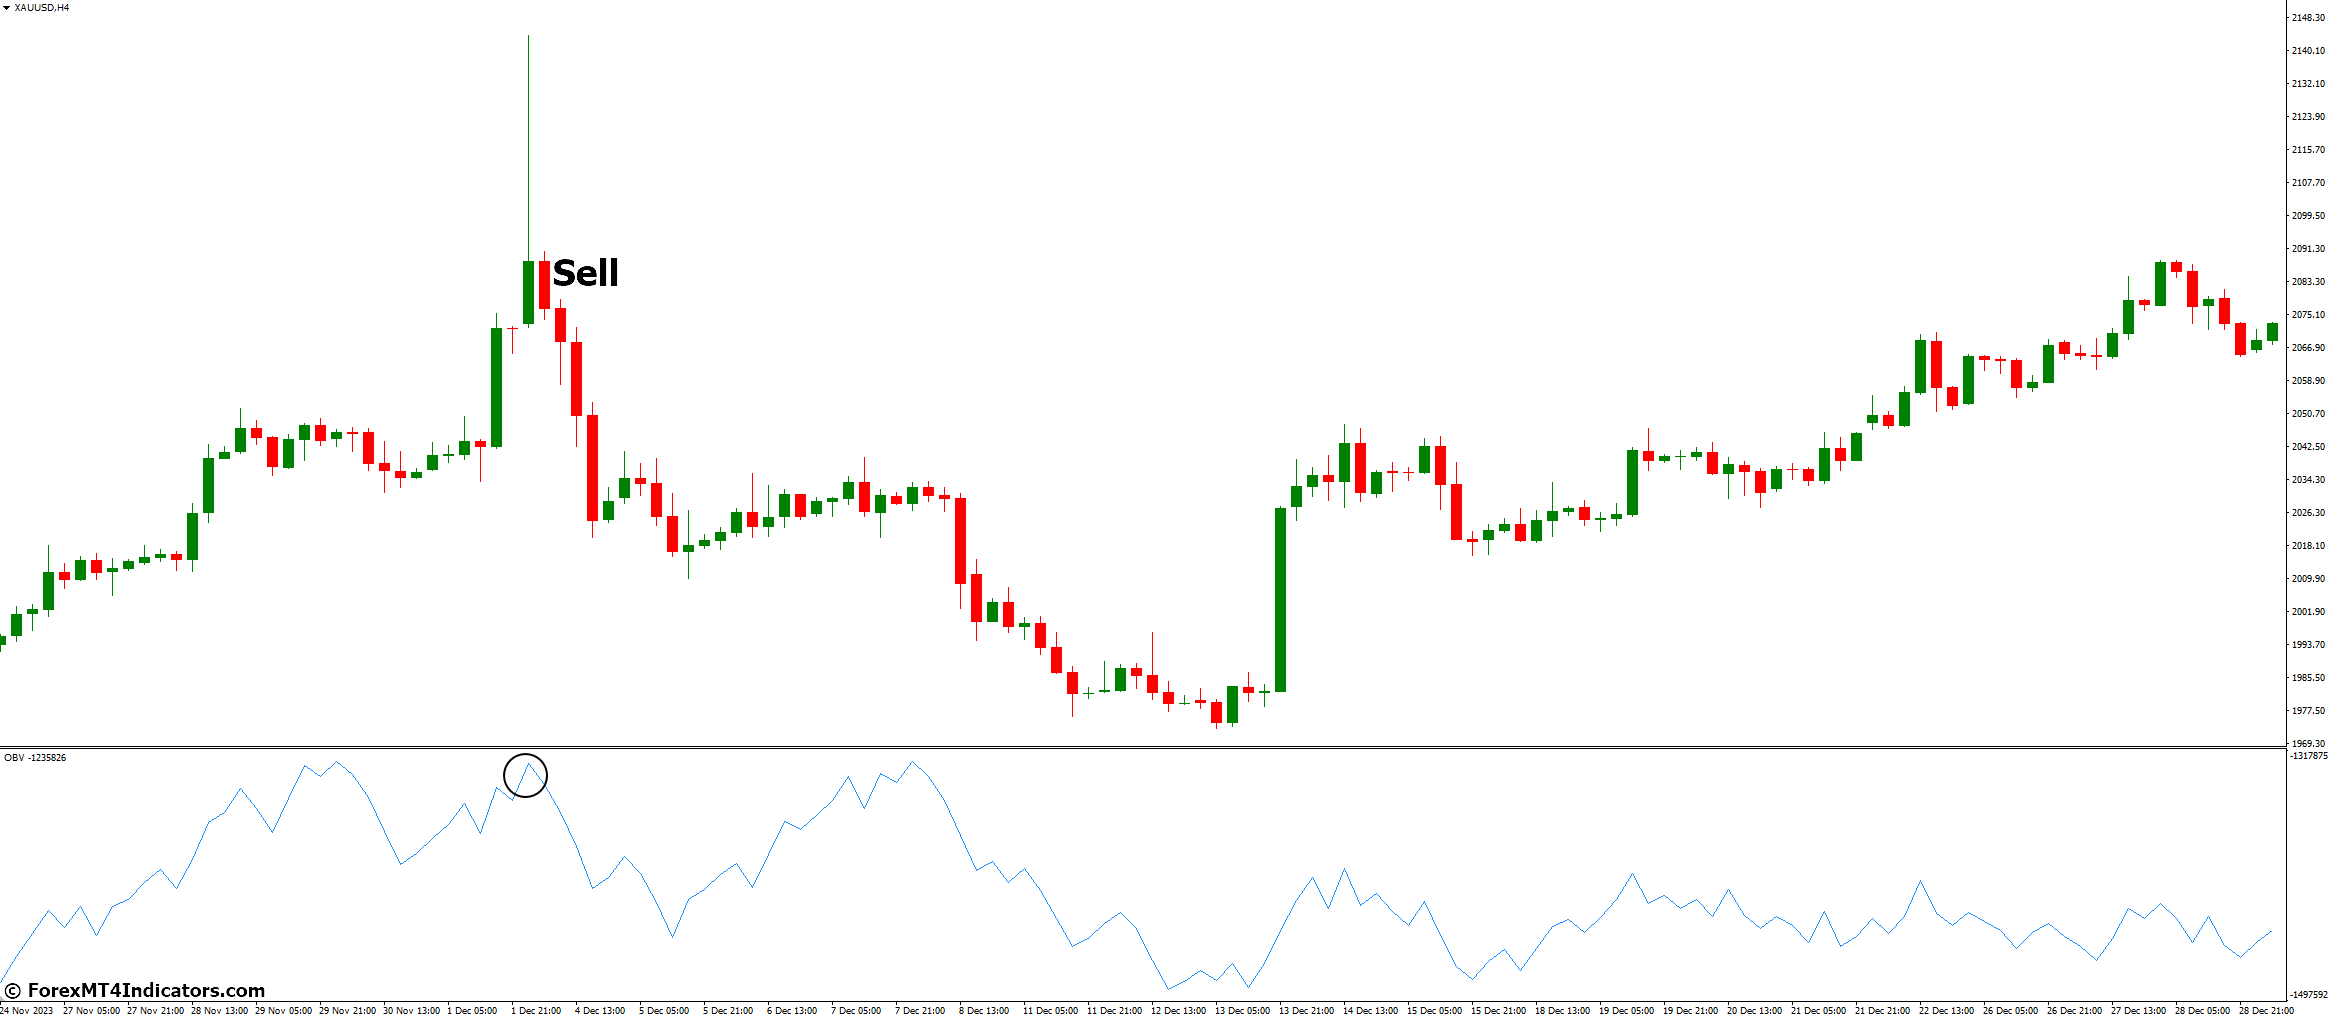 How to Trade with OBV MT4 Indicator - Sell Entry